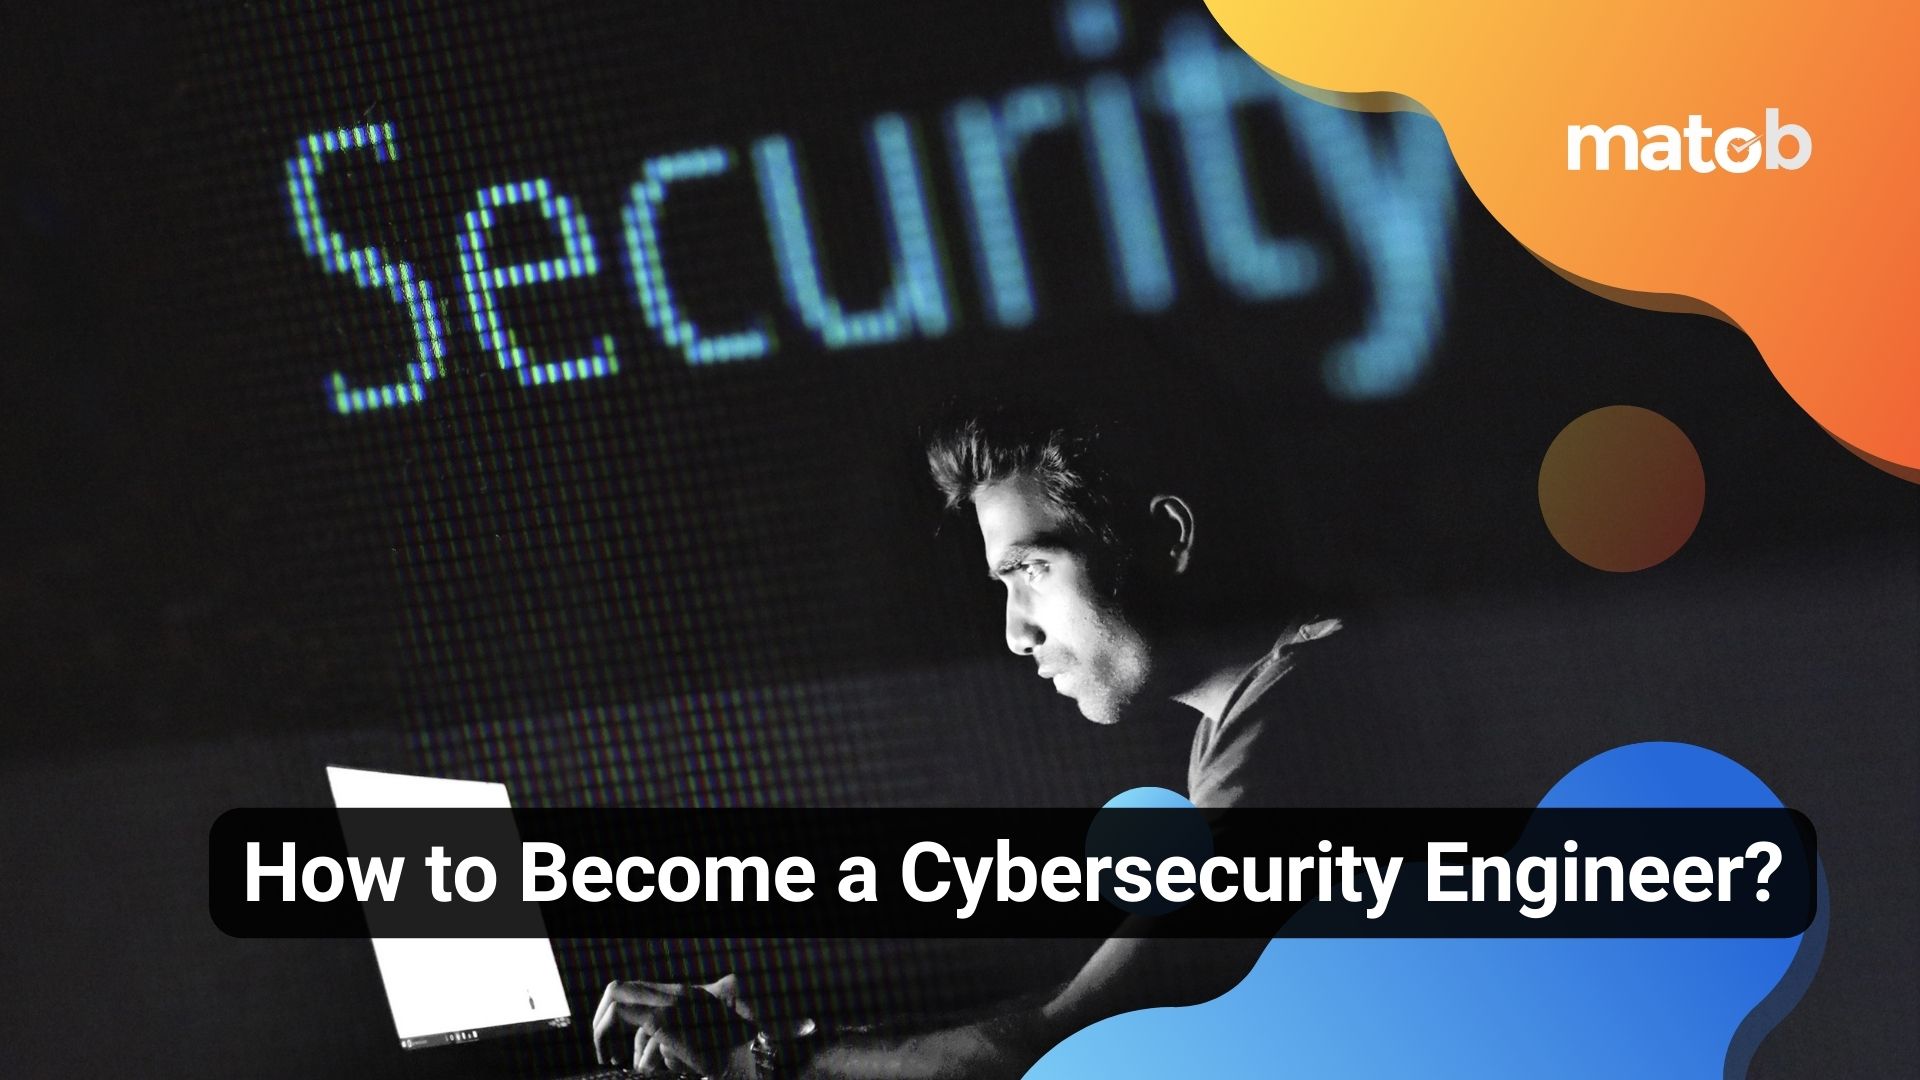 How to Become a Cybersecurity Engineer?